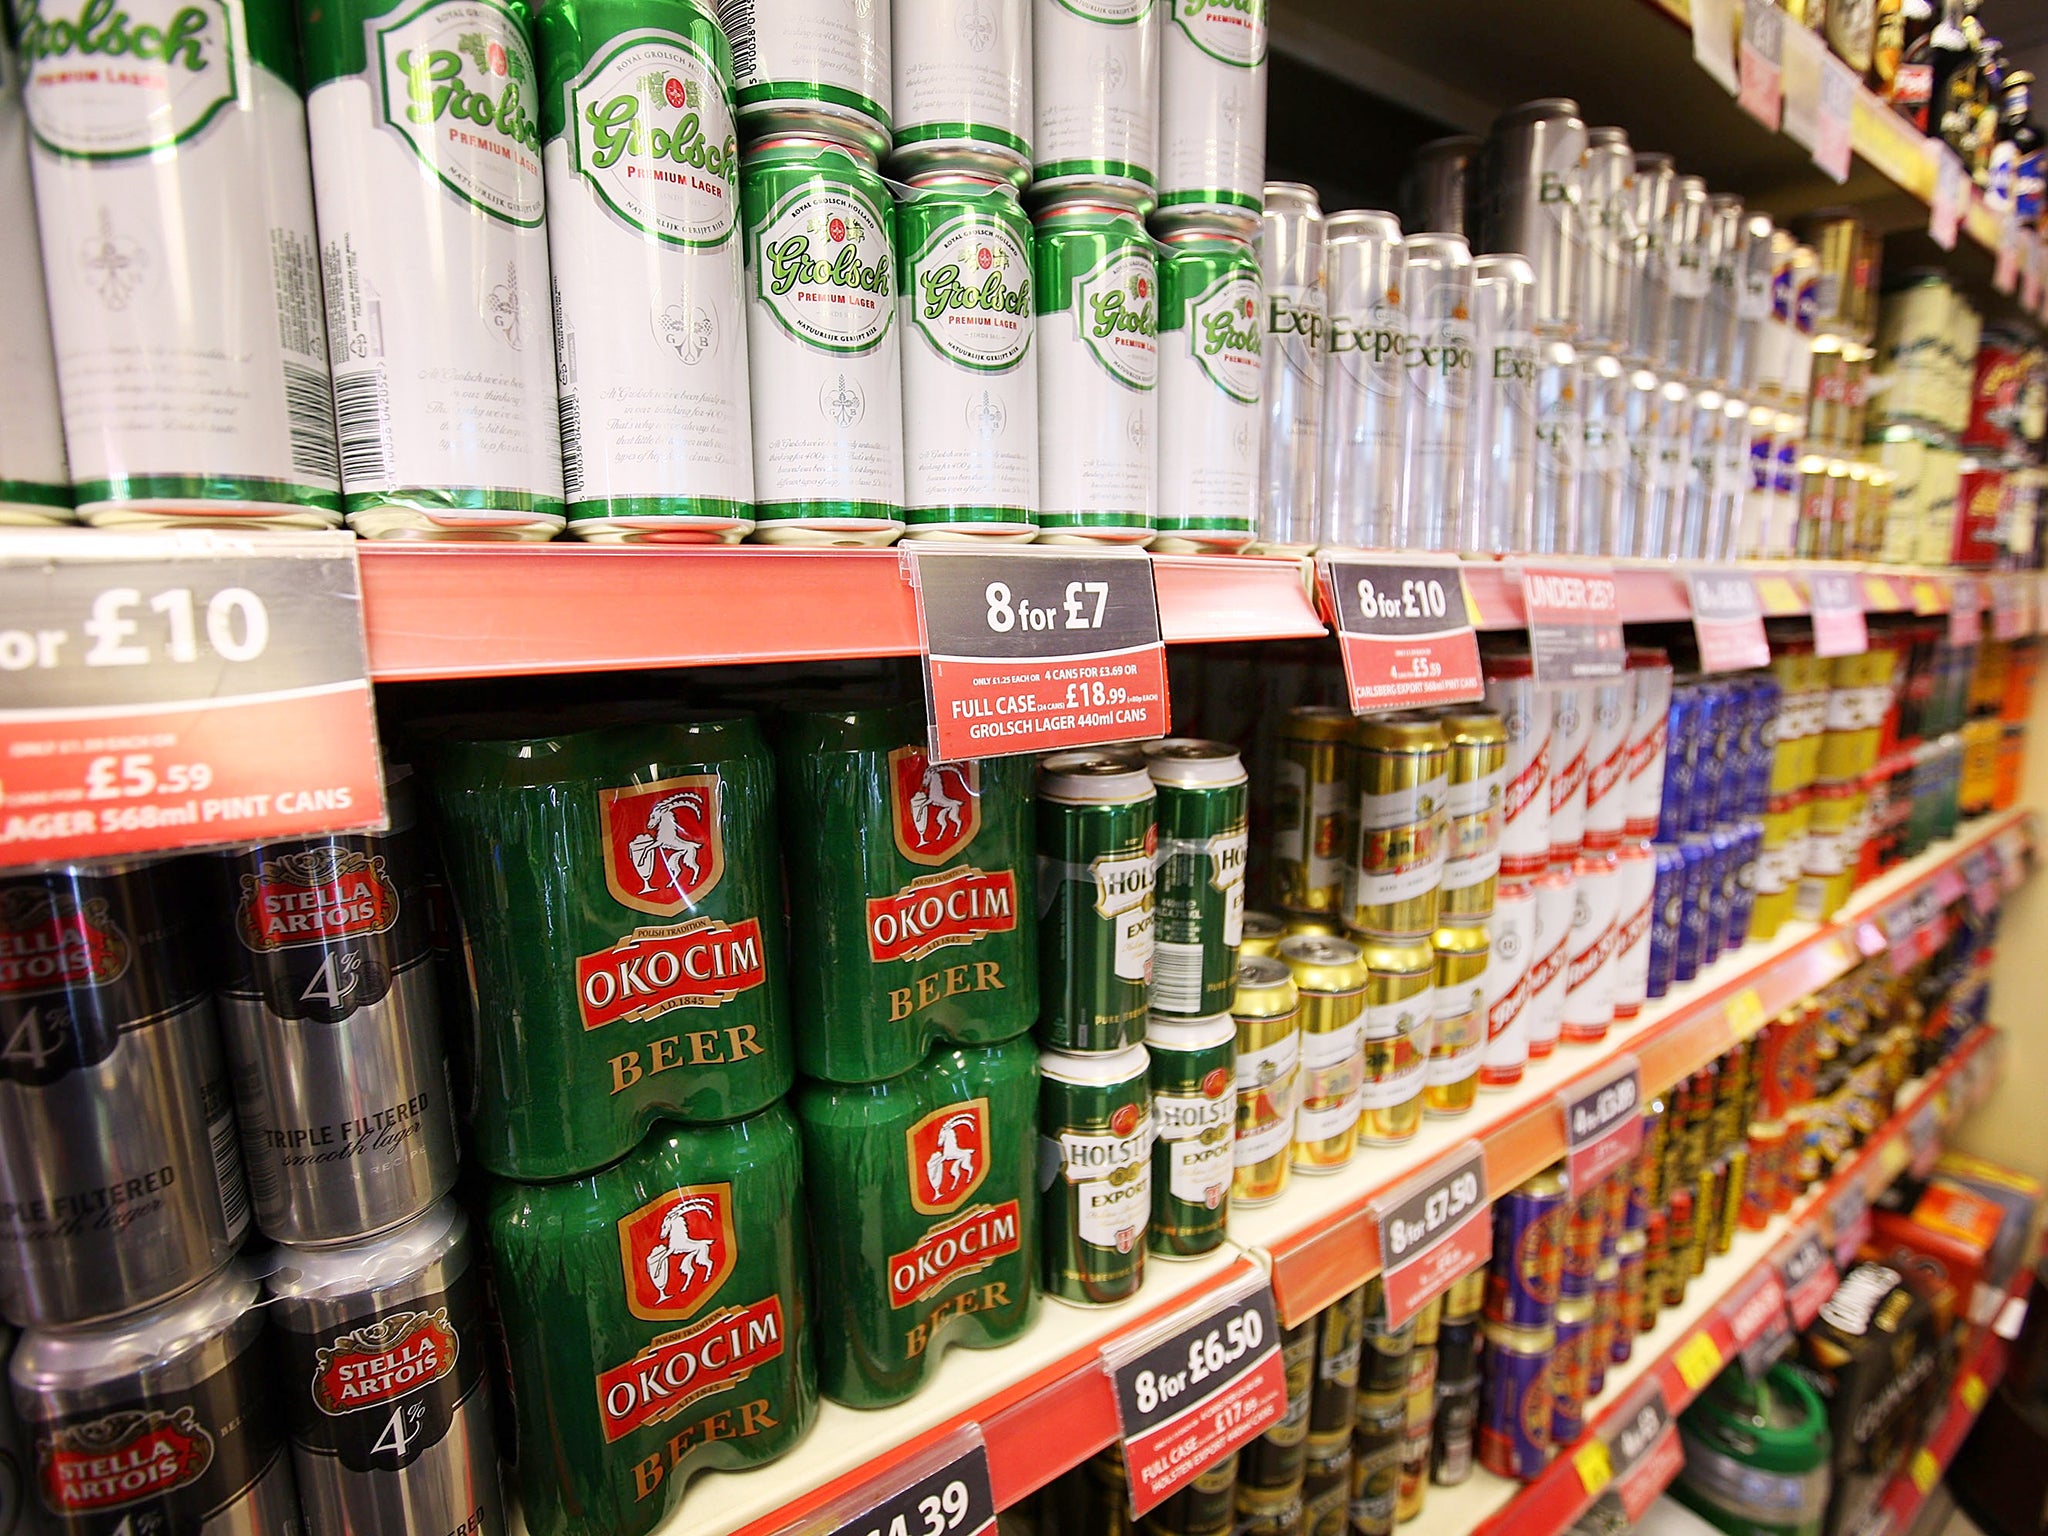 Too many people are unaware of the high calorie content of some alcoholic drinks, according to the Royal Society for Public Health